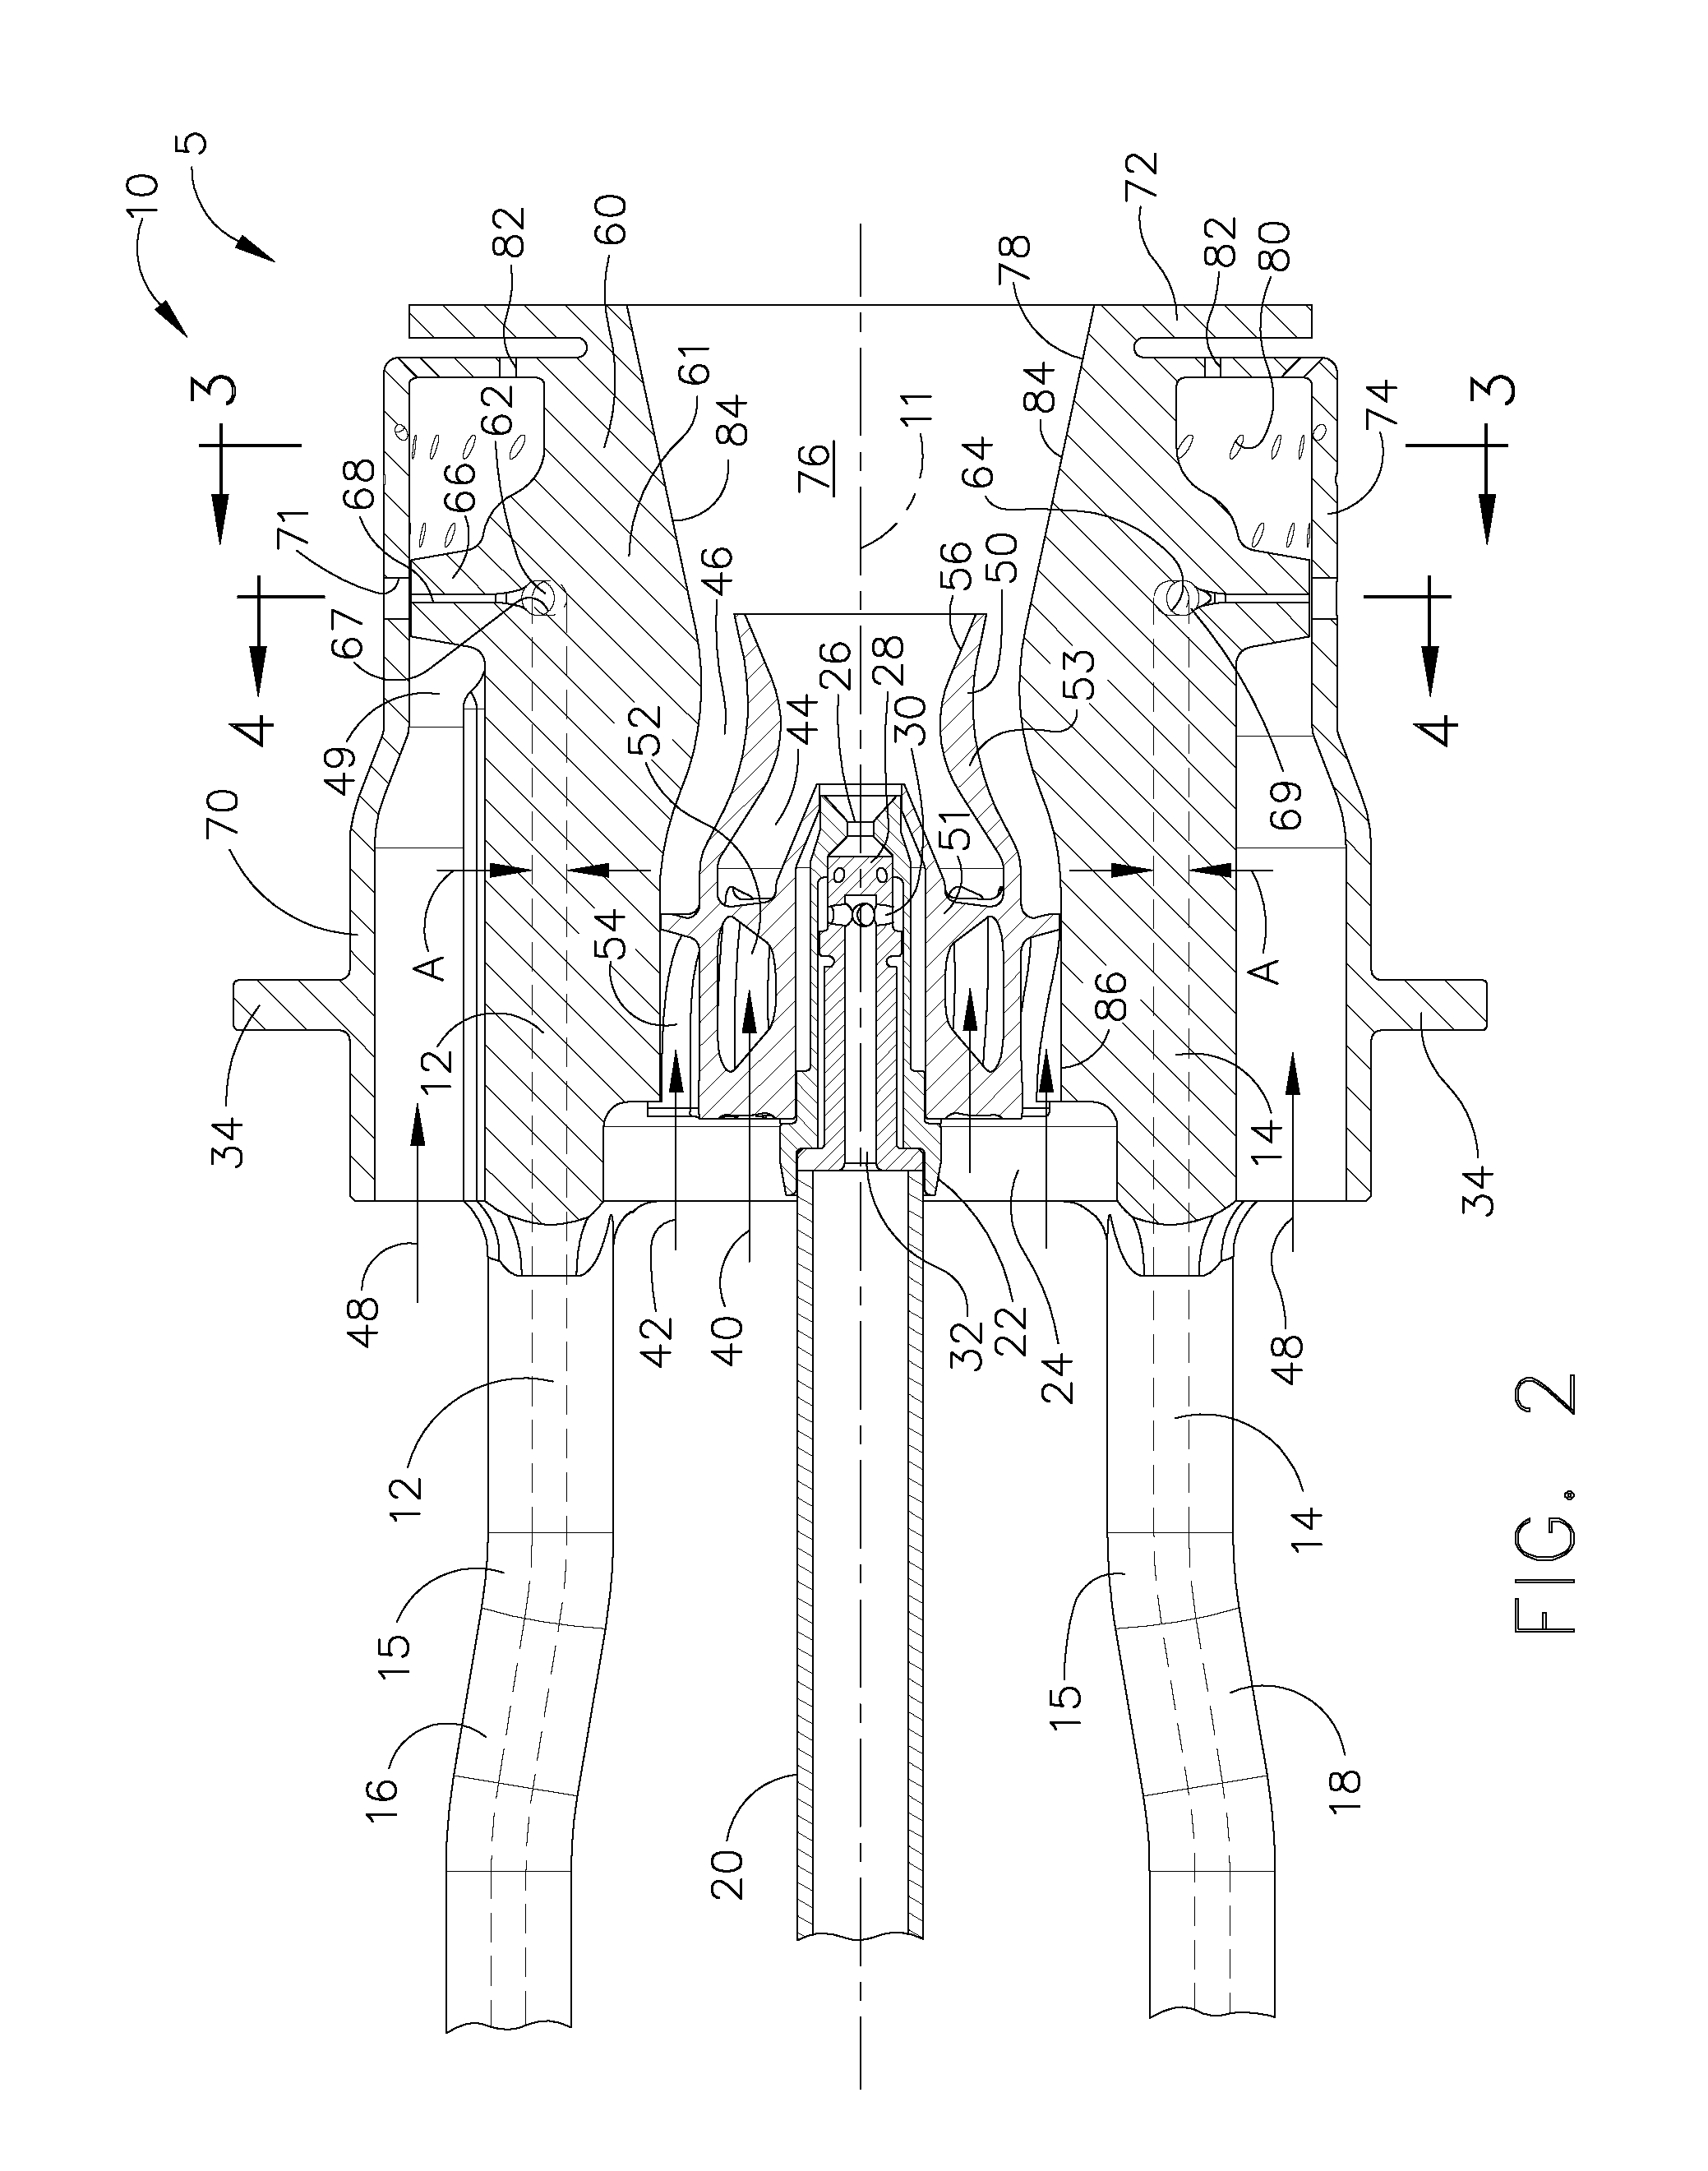 Method of manufacturing combustor components